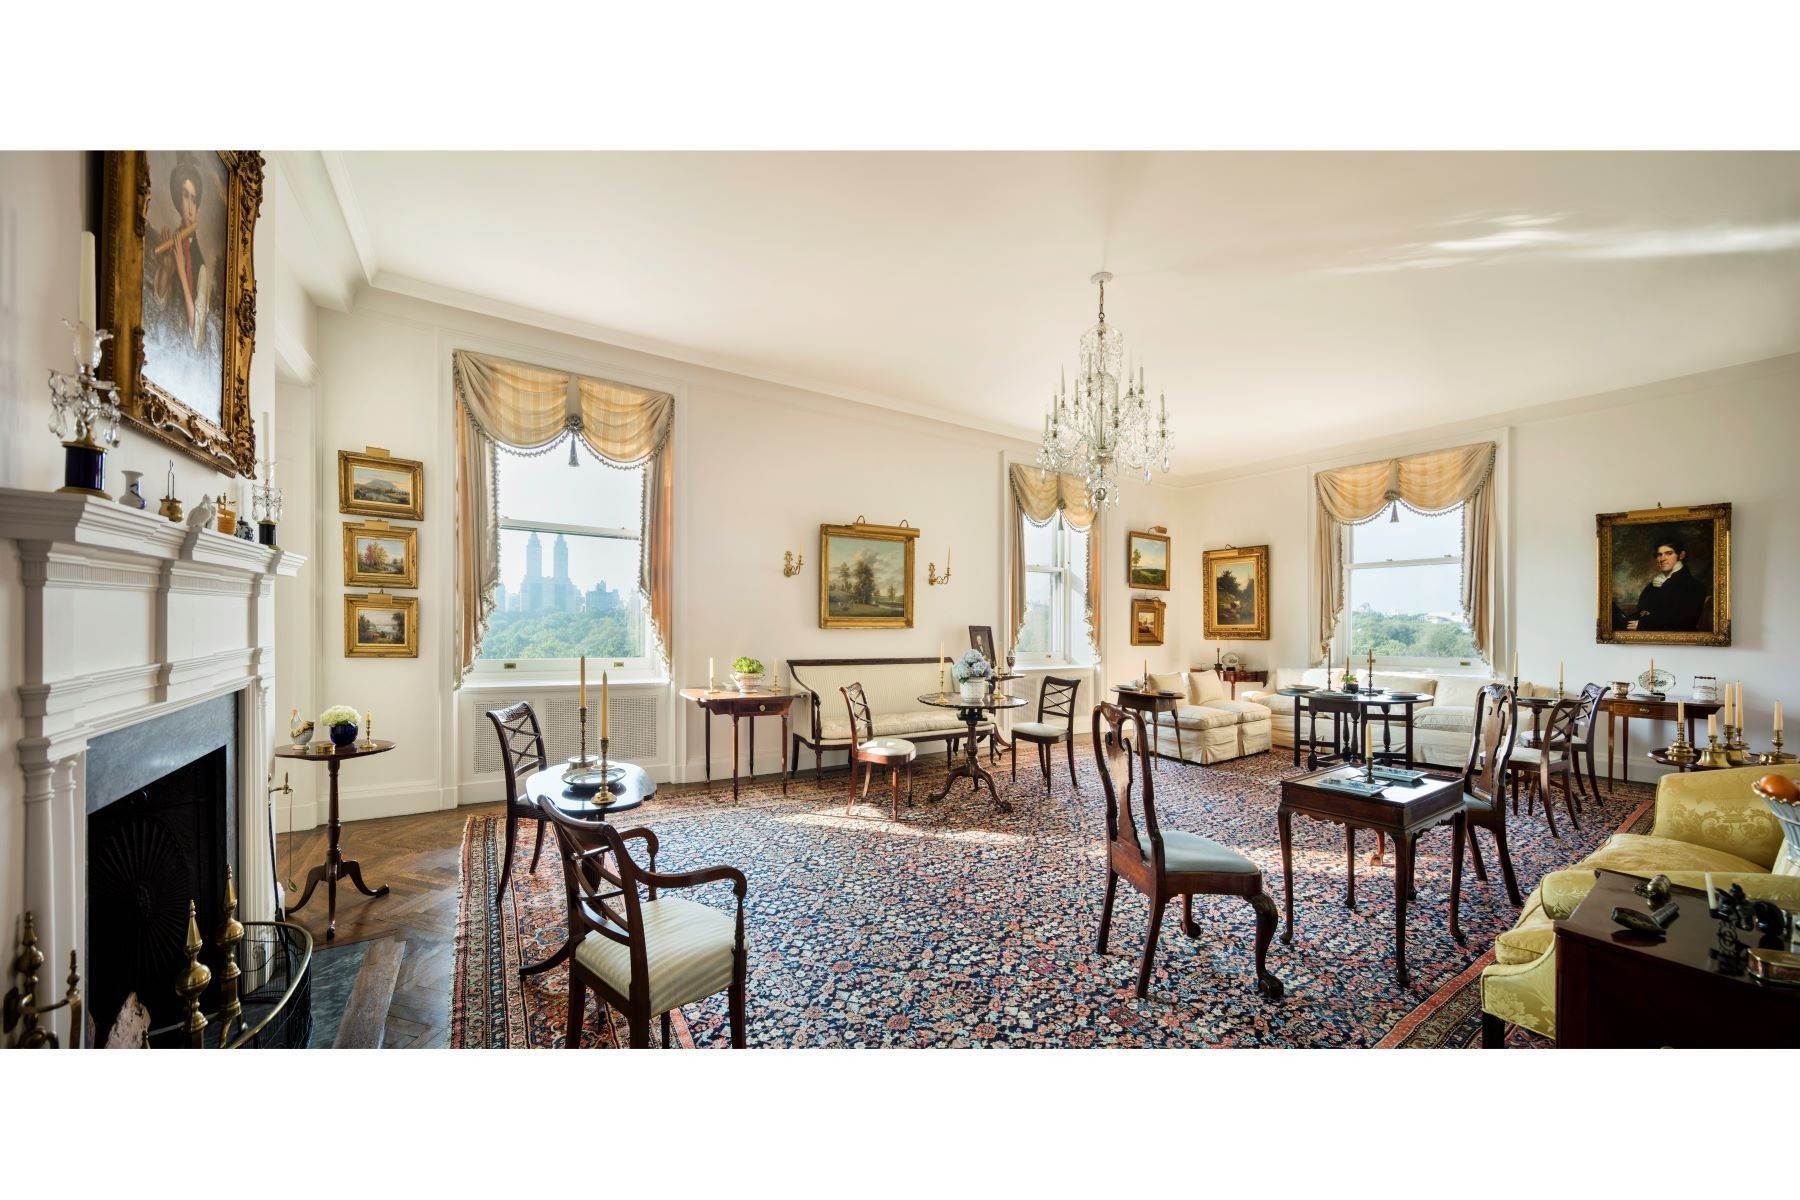 Co-op Properties for Sale at Dramatic Central Park Views 927 Fifth Avenue, 9th Floor New York, New York 10021 United States